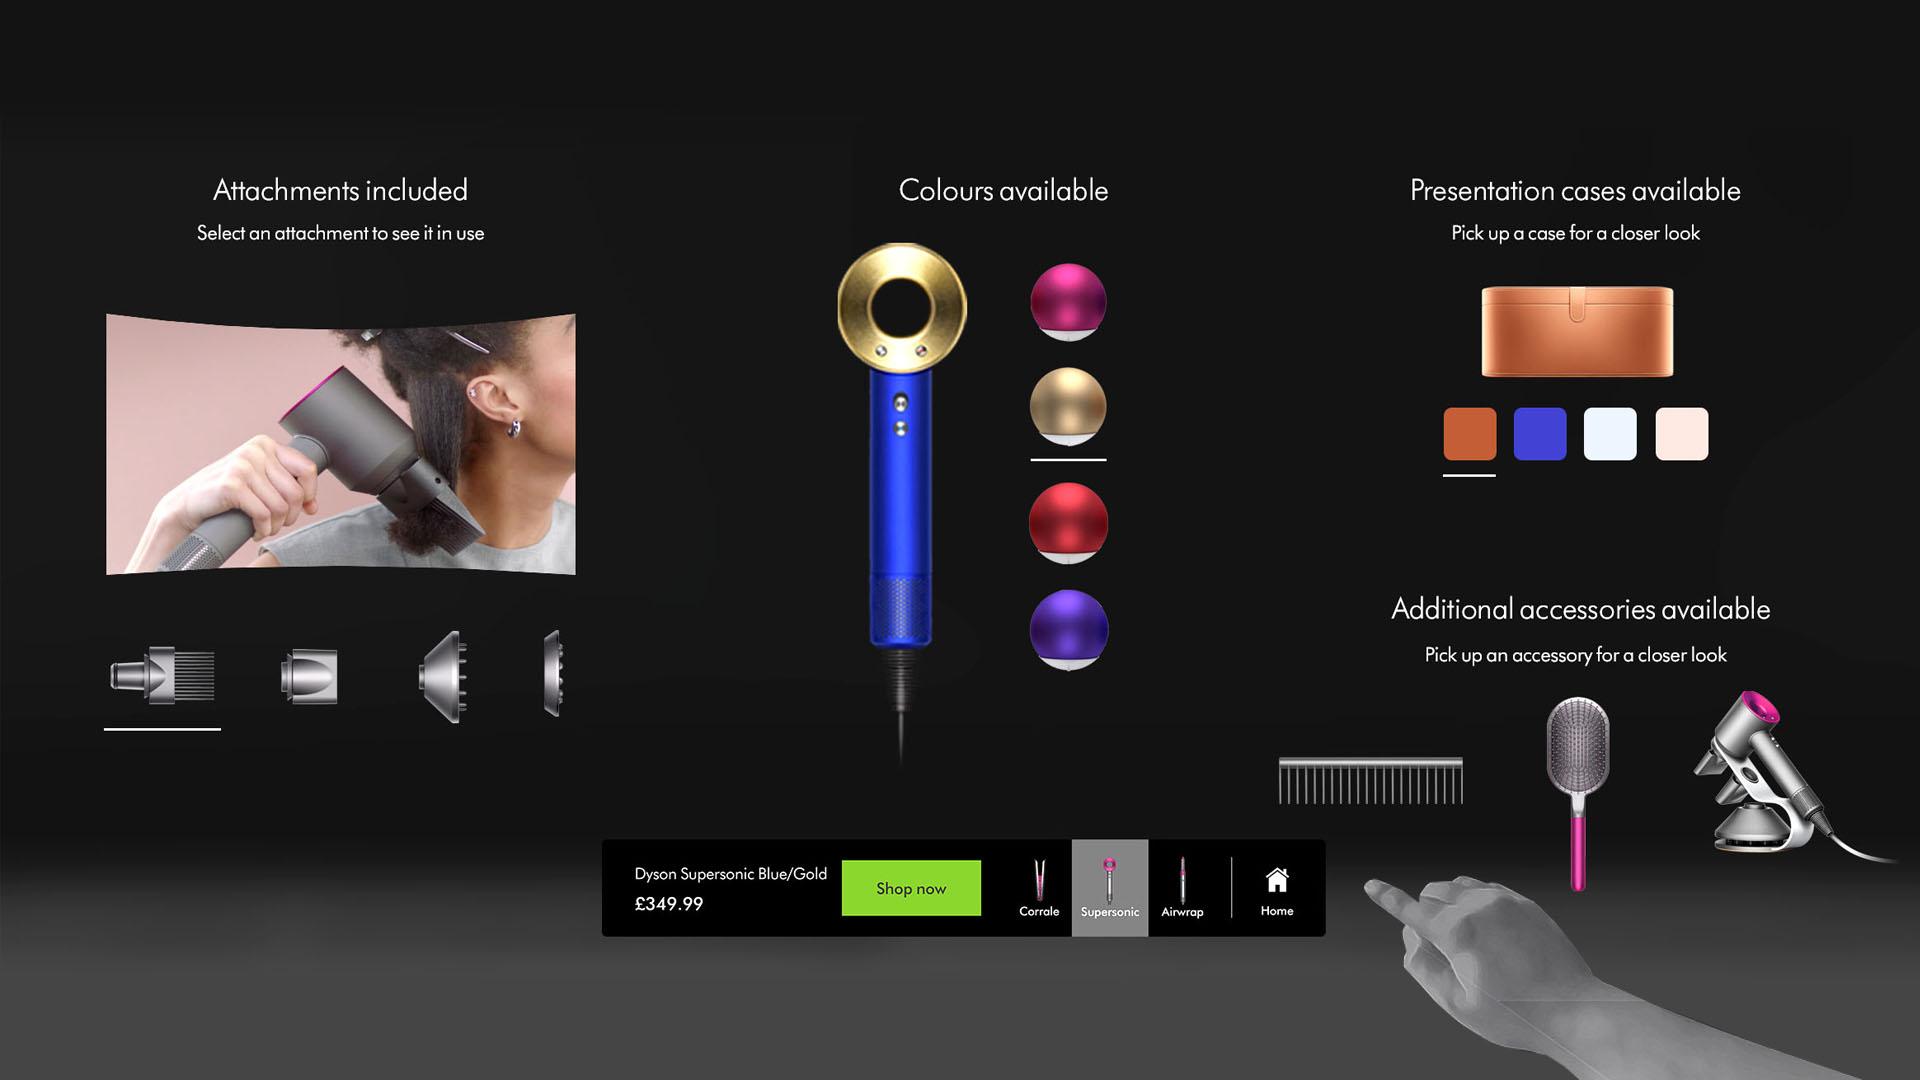 Colour options and how-to videos for the Dyson Supersonic hair dryer.